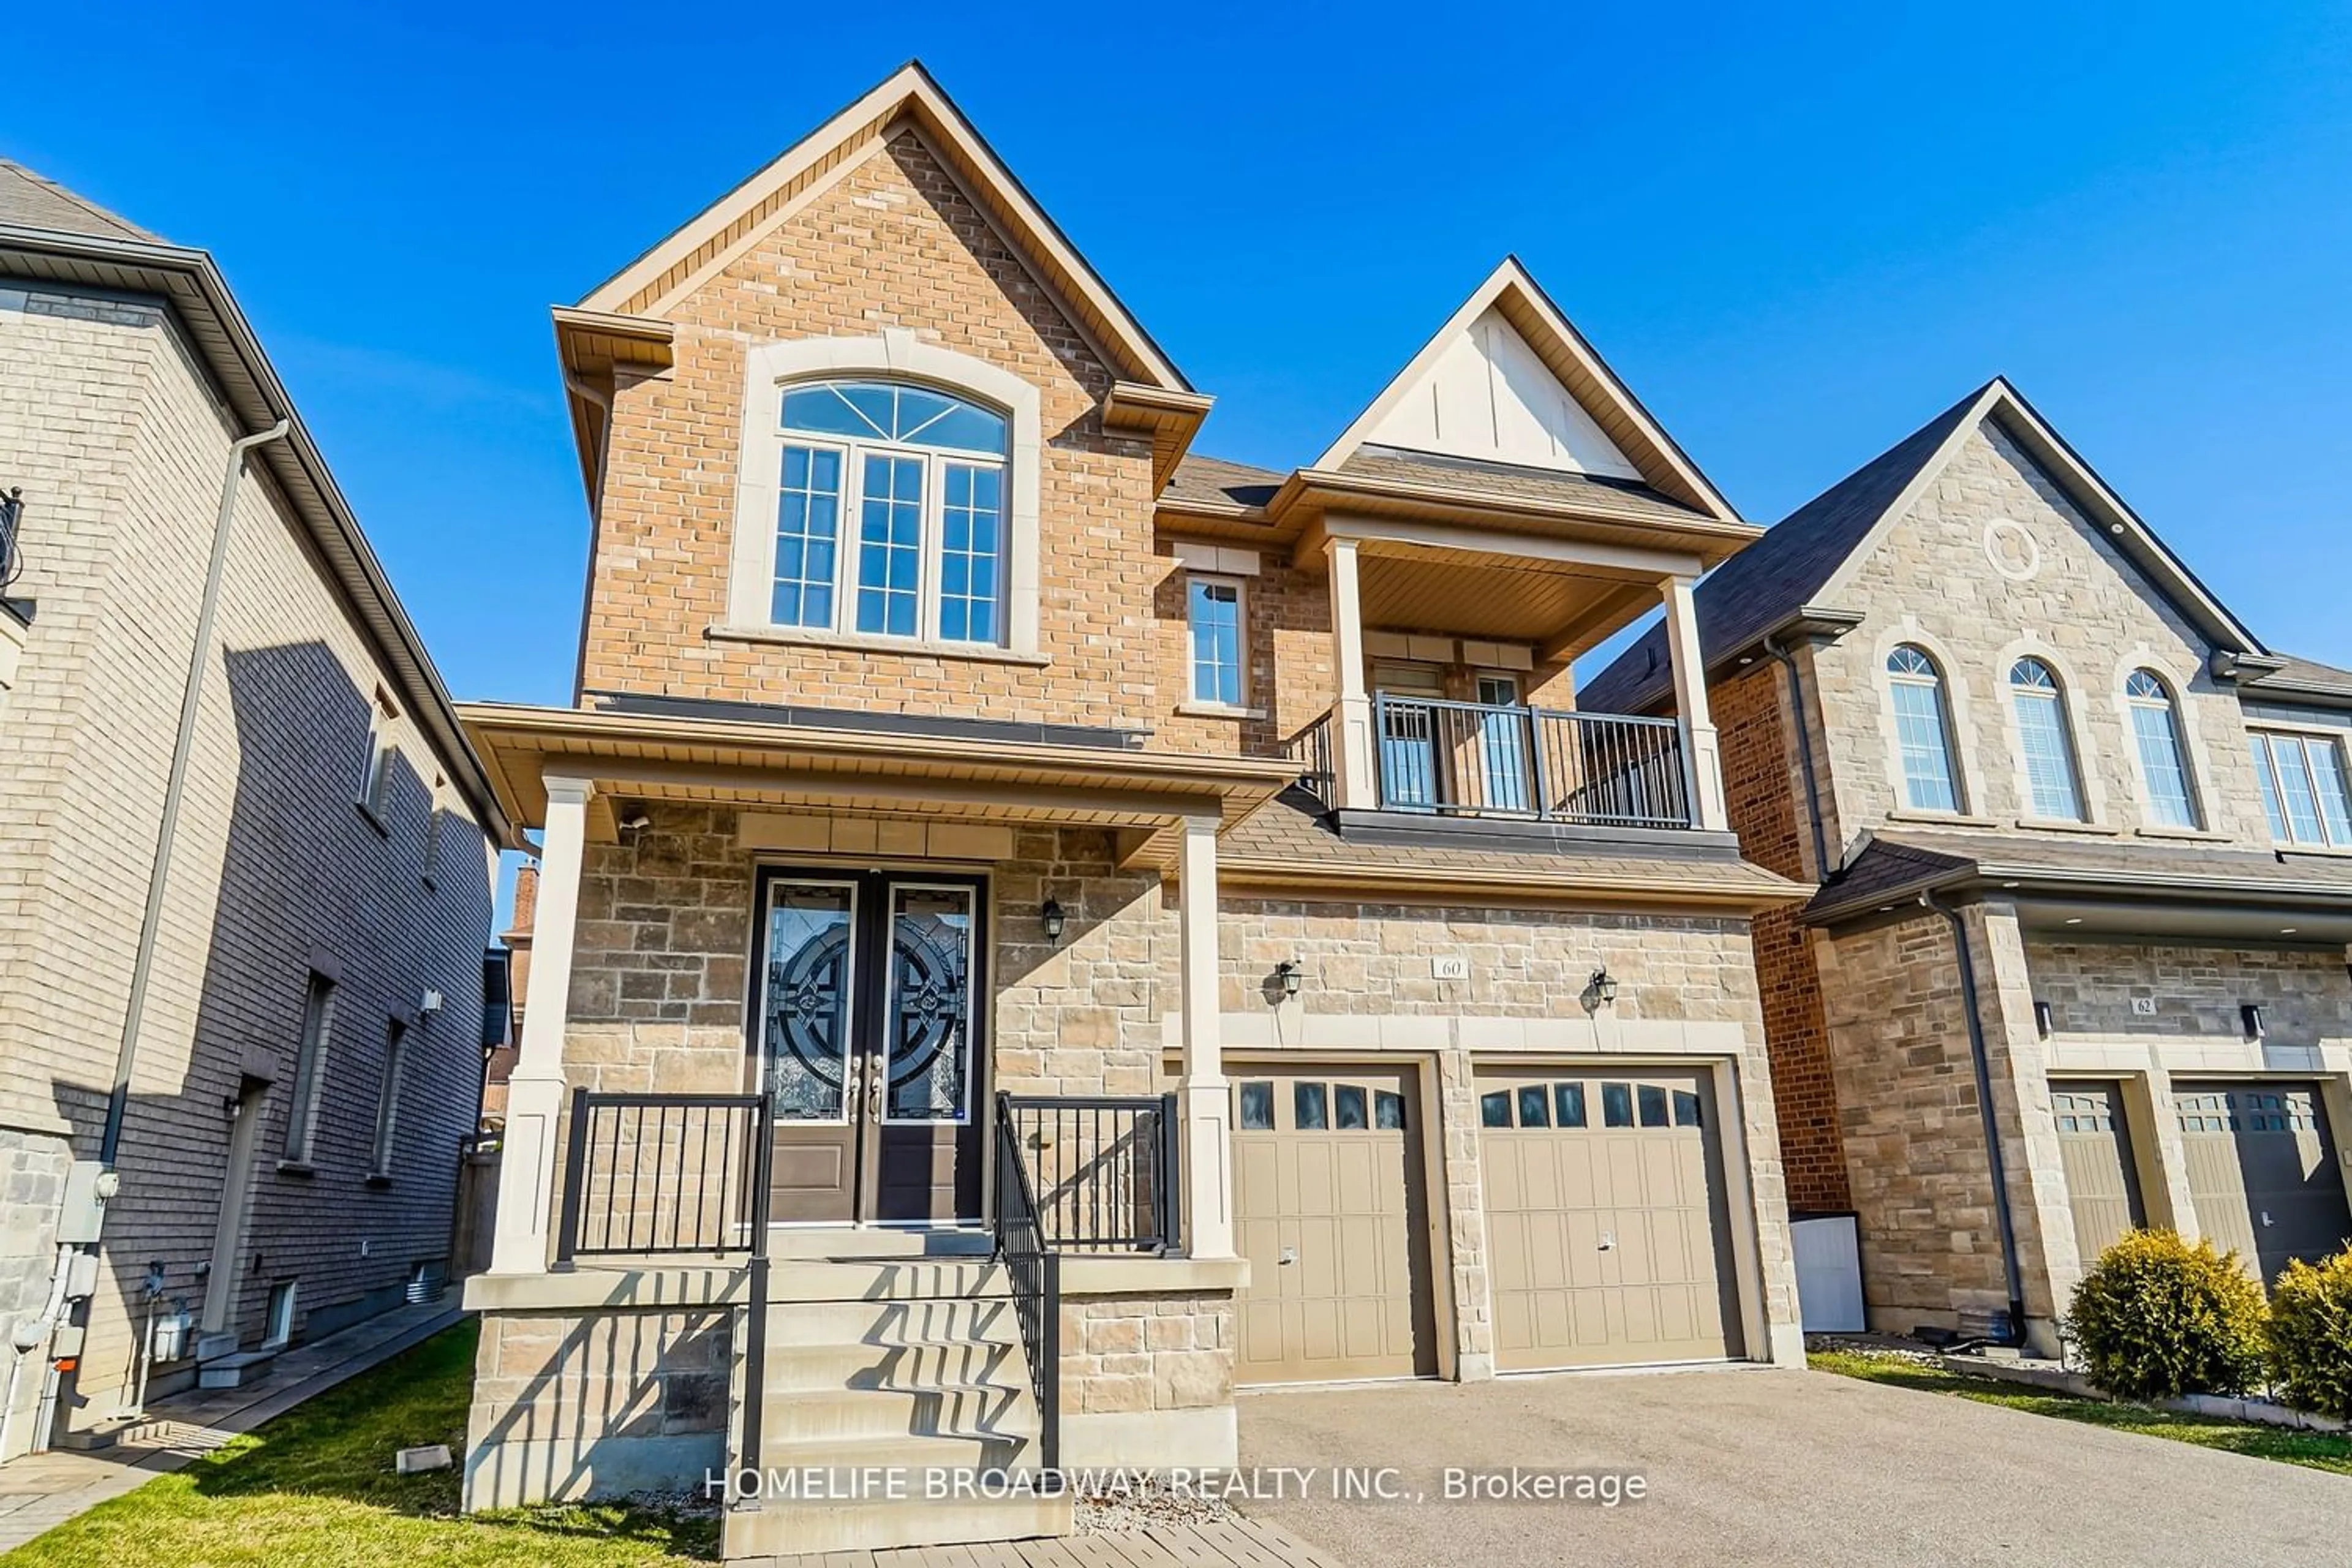 Home with brick exterior material for 60 Marbrook St, Richmond Hill Ontario L4C 0L1